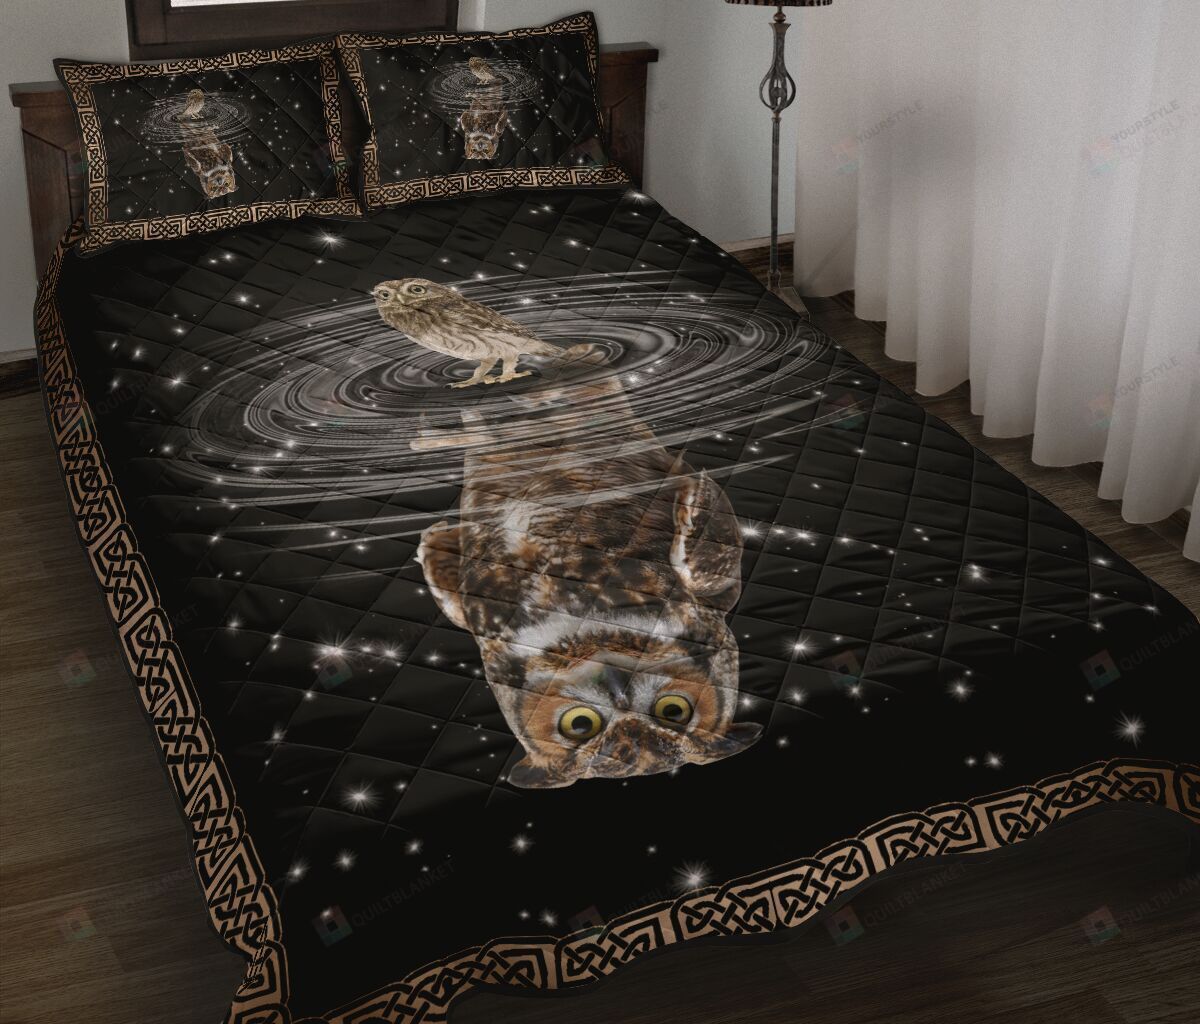 Owl Reflection Quilt Bed Sheets Spread Duvet Cover Bedding Sets